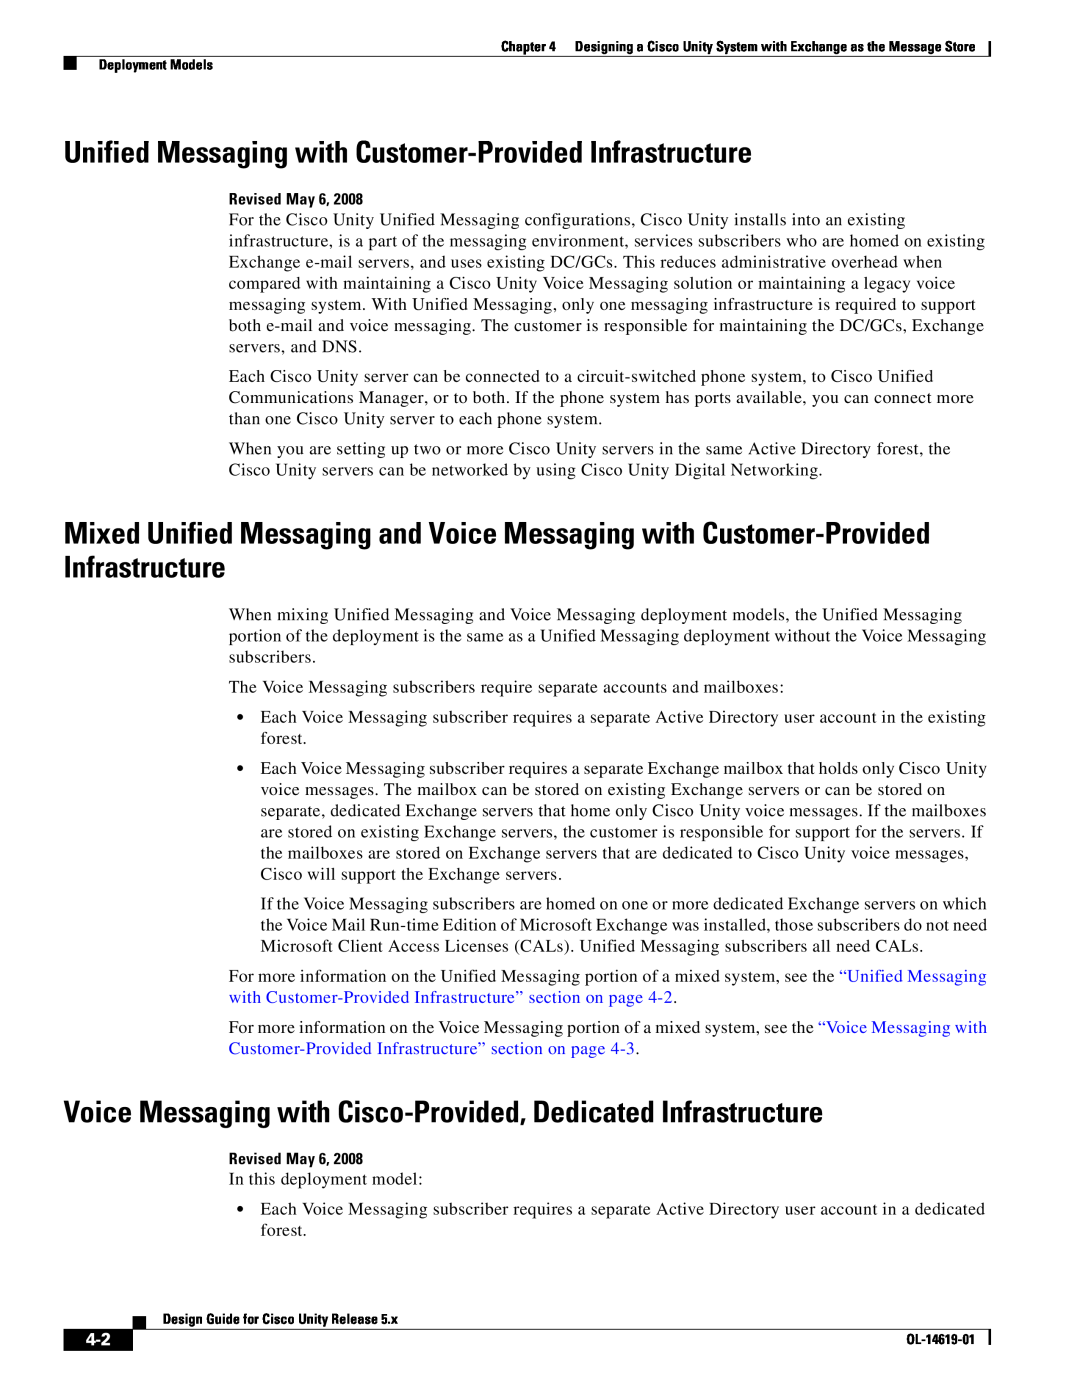 Cisco Systems OL-14619-01 manual Unified Messaging with Customer-Provided Infrastructure 